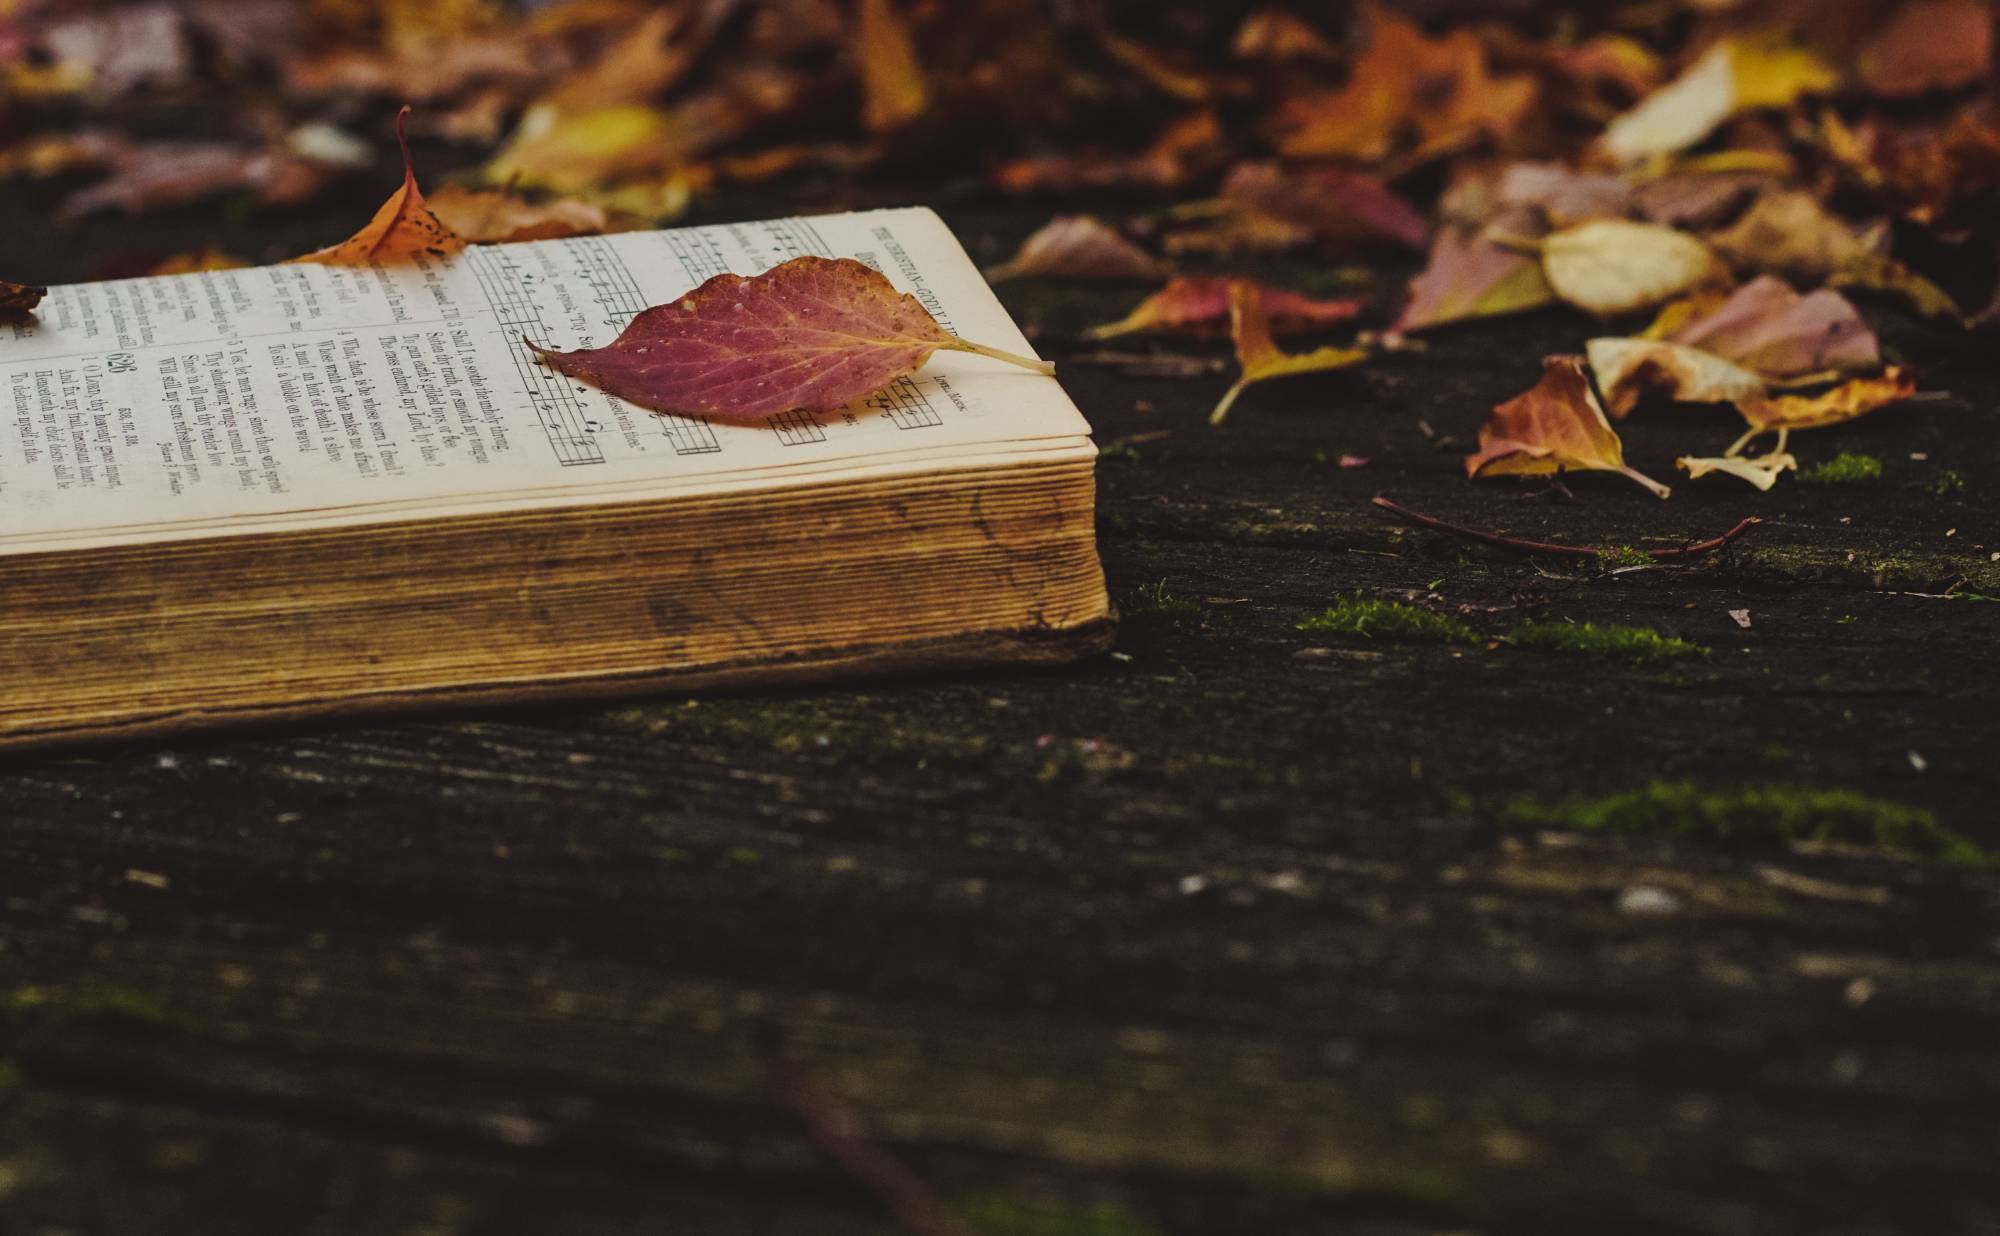 A worn chapter book on the ground covered in fall leaves.